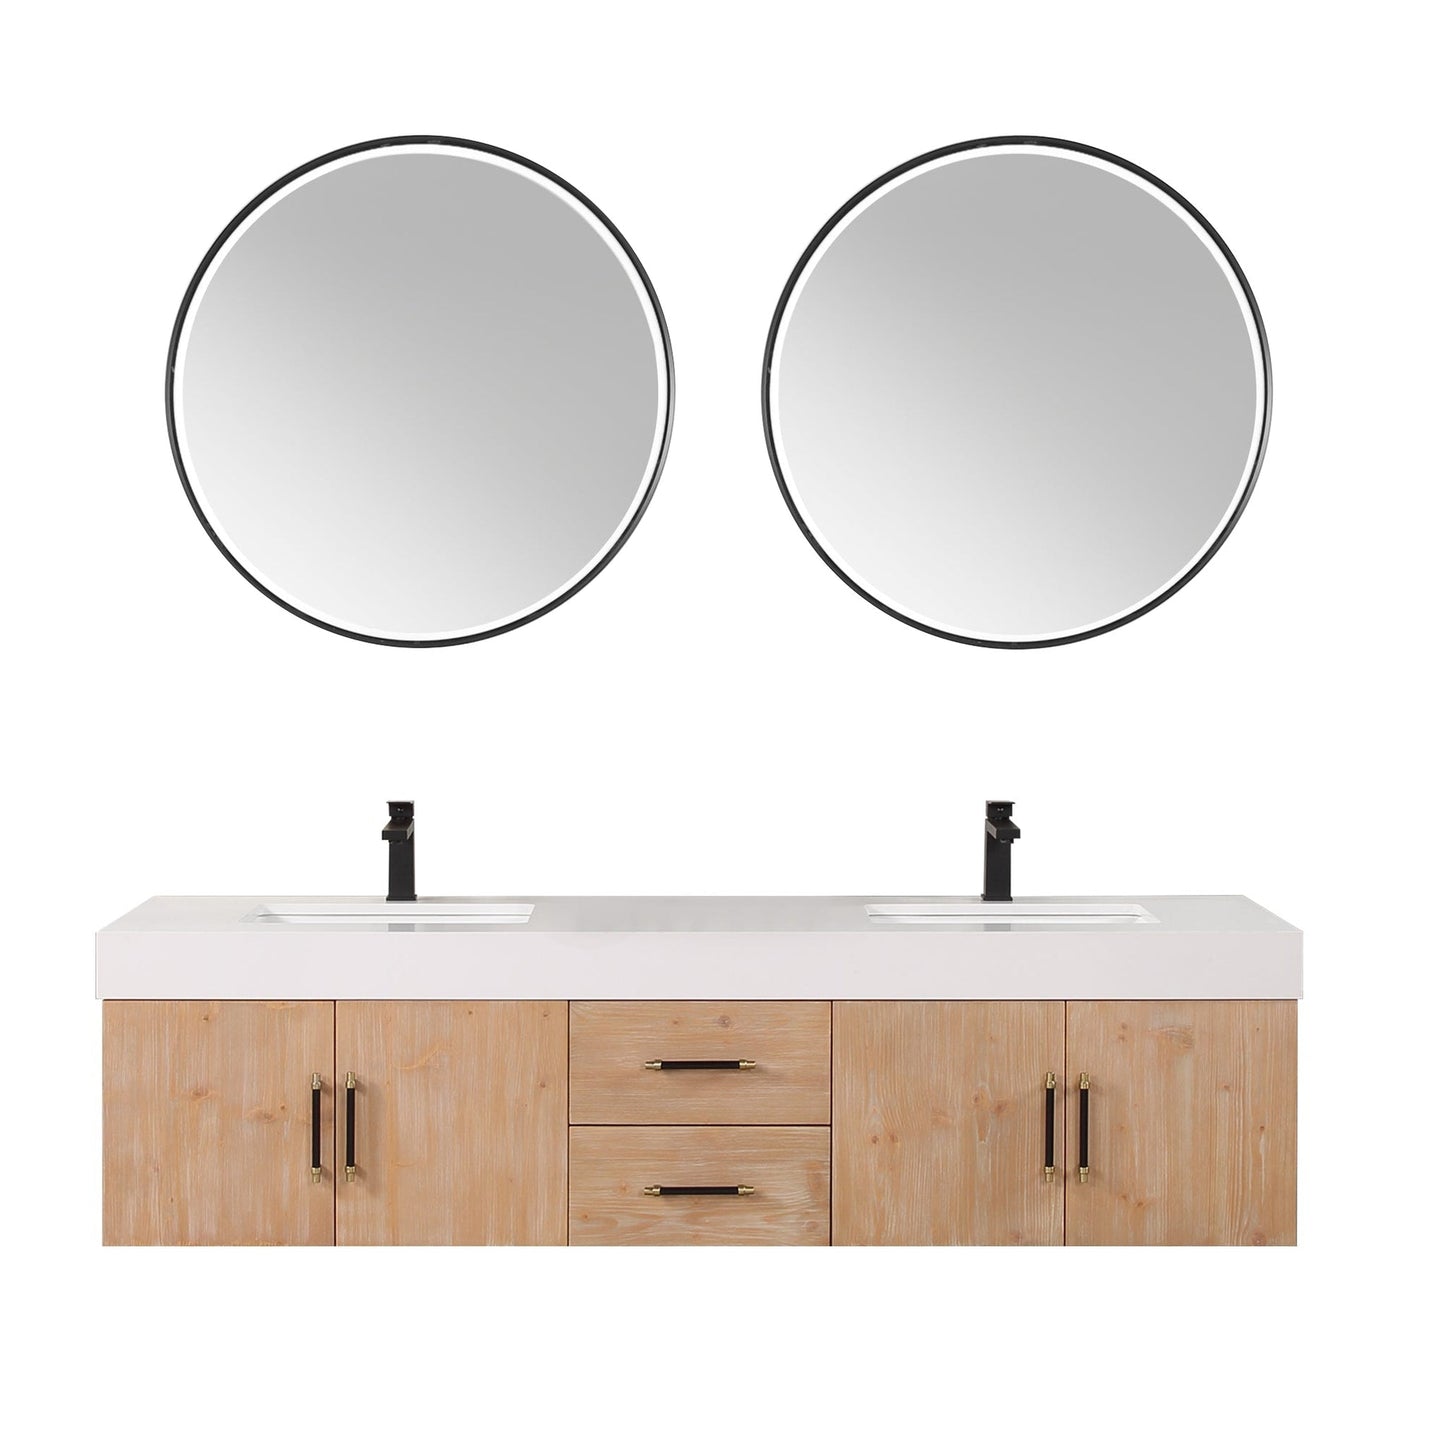 Altair Corchia 72" Light Brown Wall-Mounted Double Bathroom Vanity Set With Mirror, White Composite Stone Top, Two Rectangular Undermount Ceramic Sinks, and Overflow